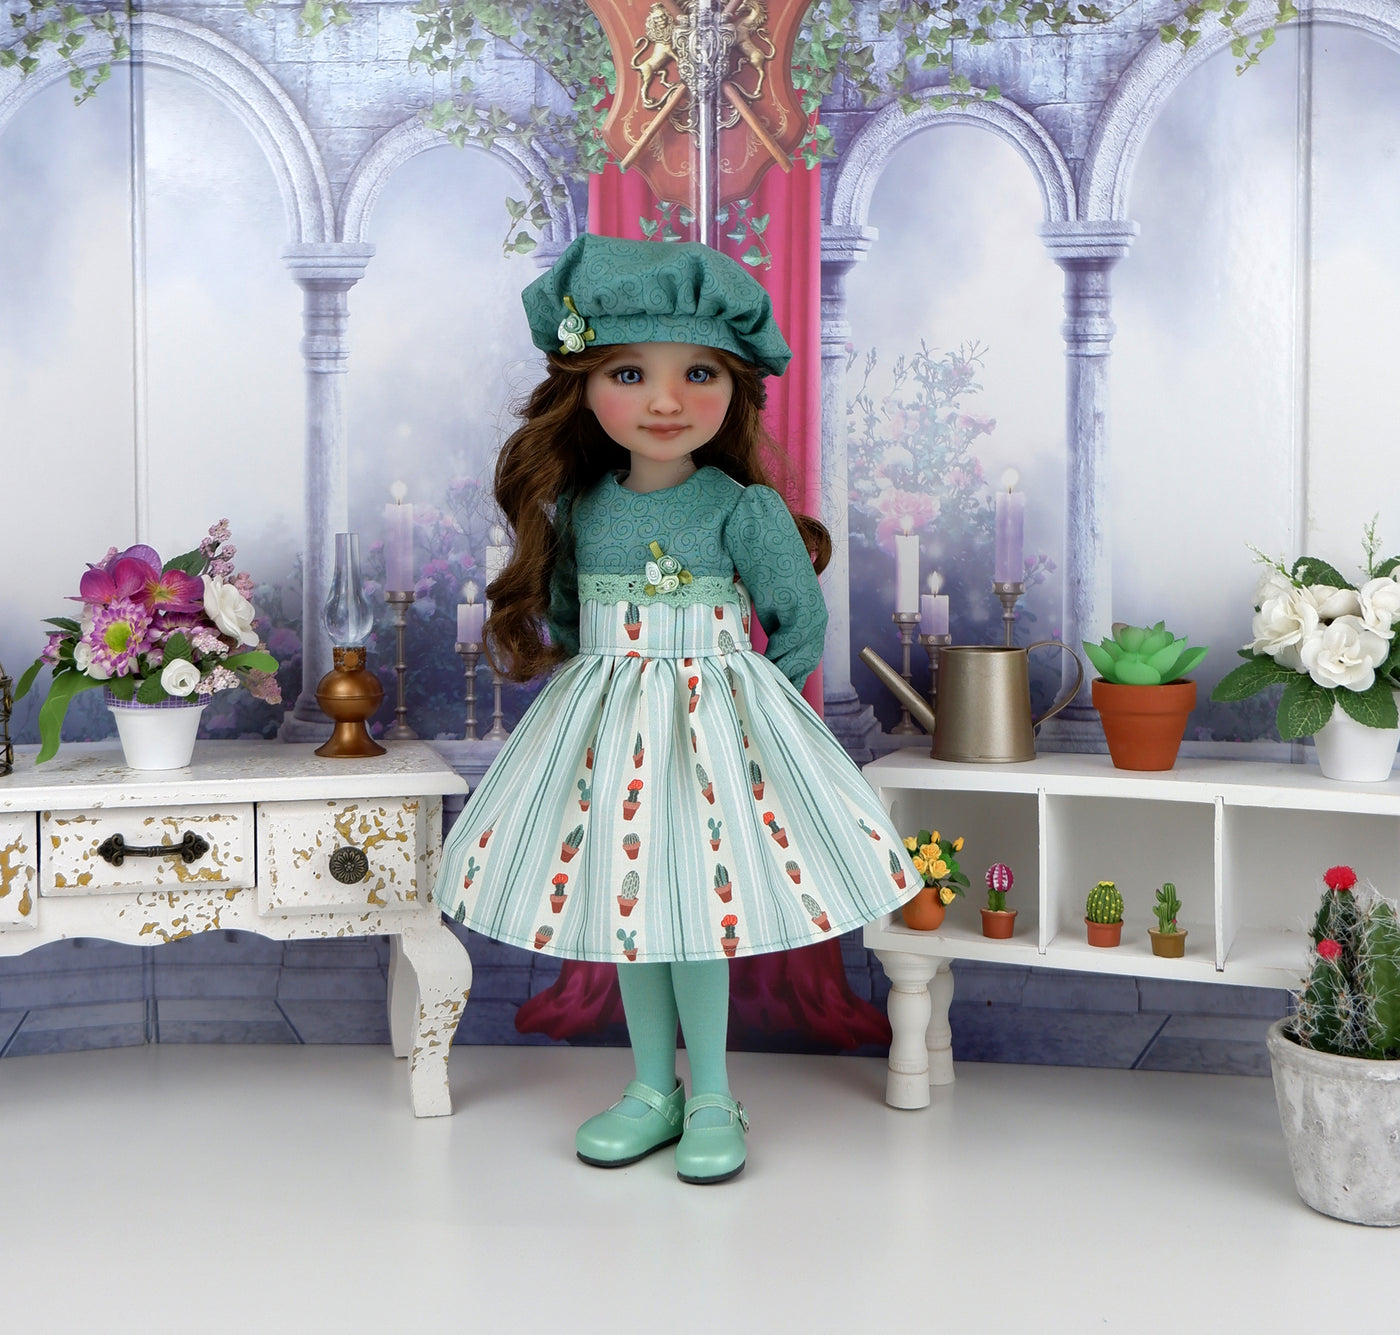 Potted Cactus - dress with shoes for Ruby Red Fashion Friends doll